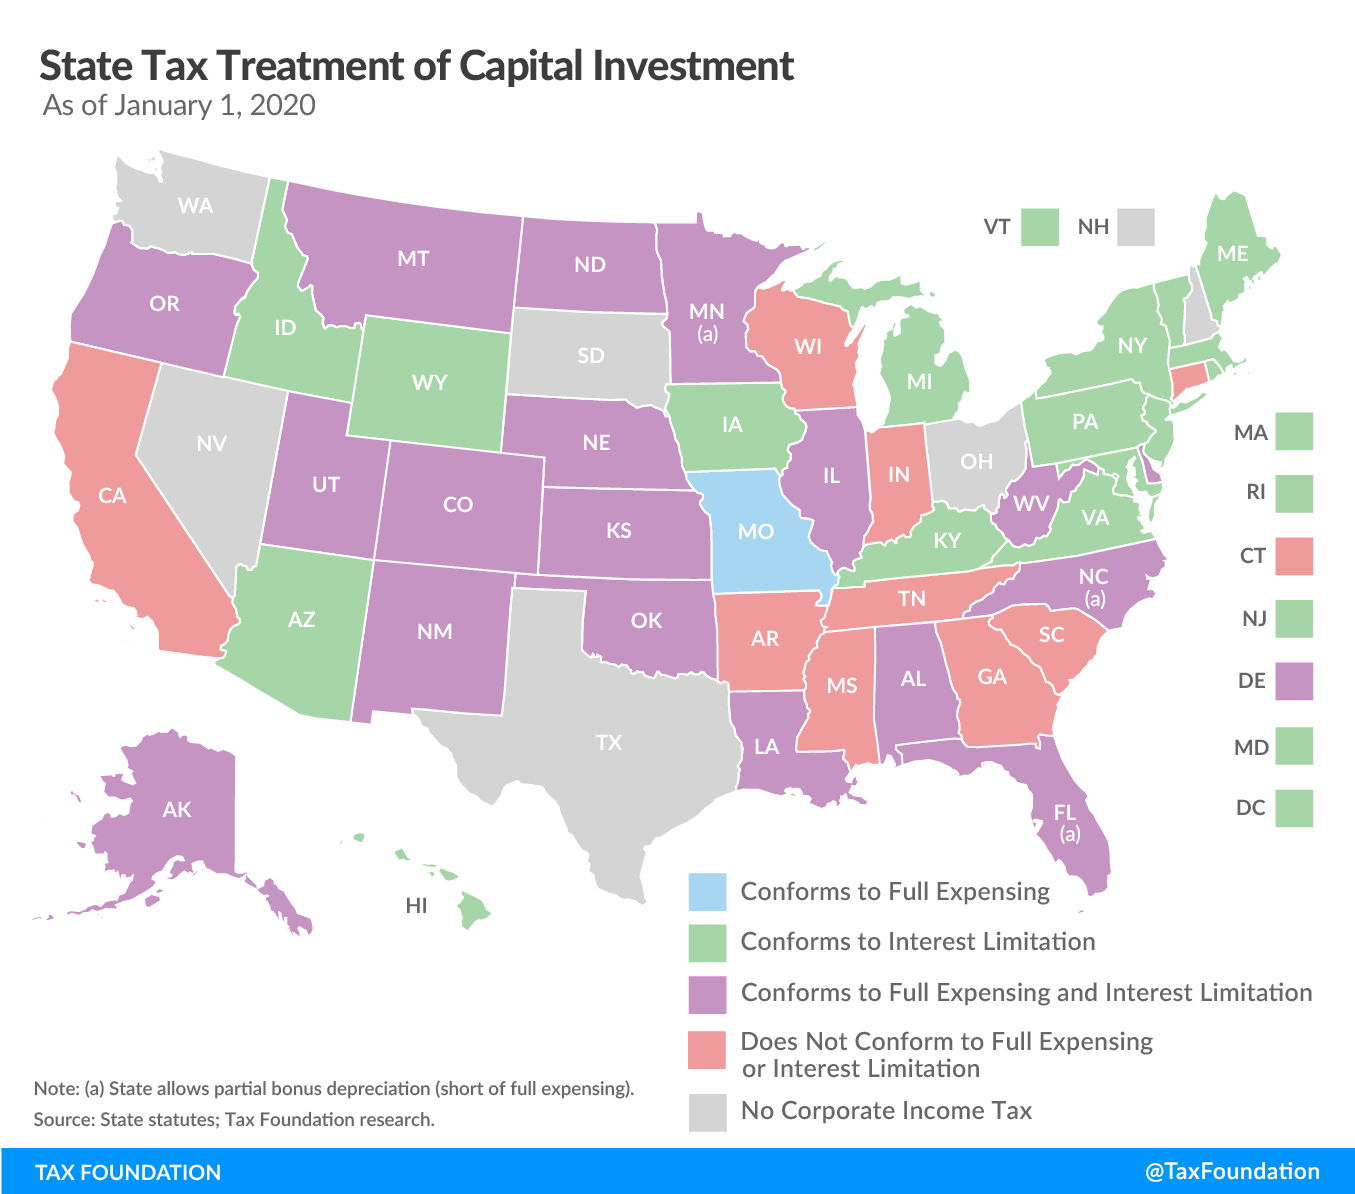 State tax treatment of capital investment (Full expensing and interest limitation)